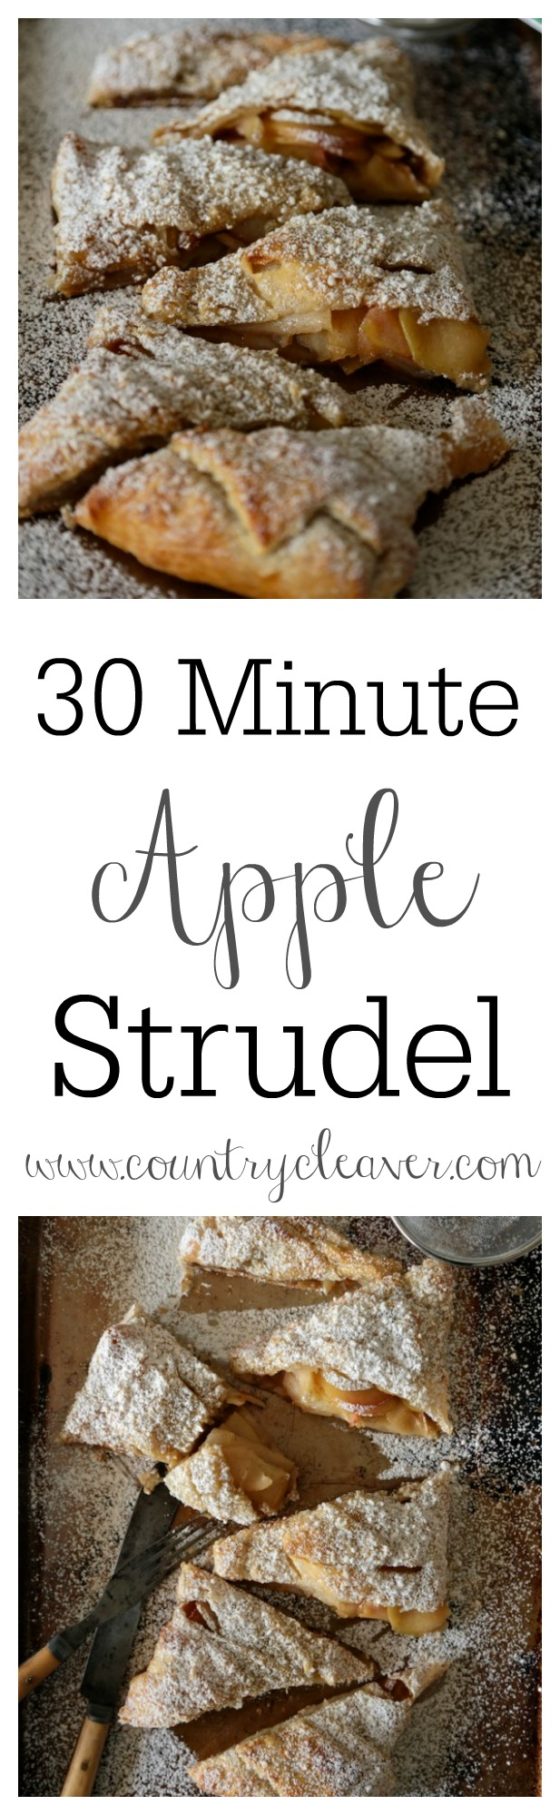 30 Minute Apple Strudel- www.countrycleaver.com